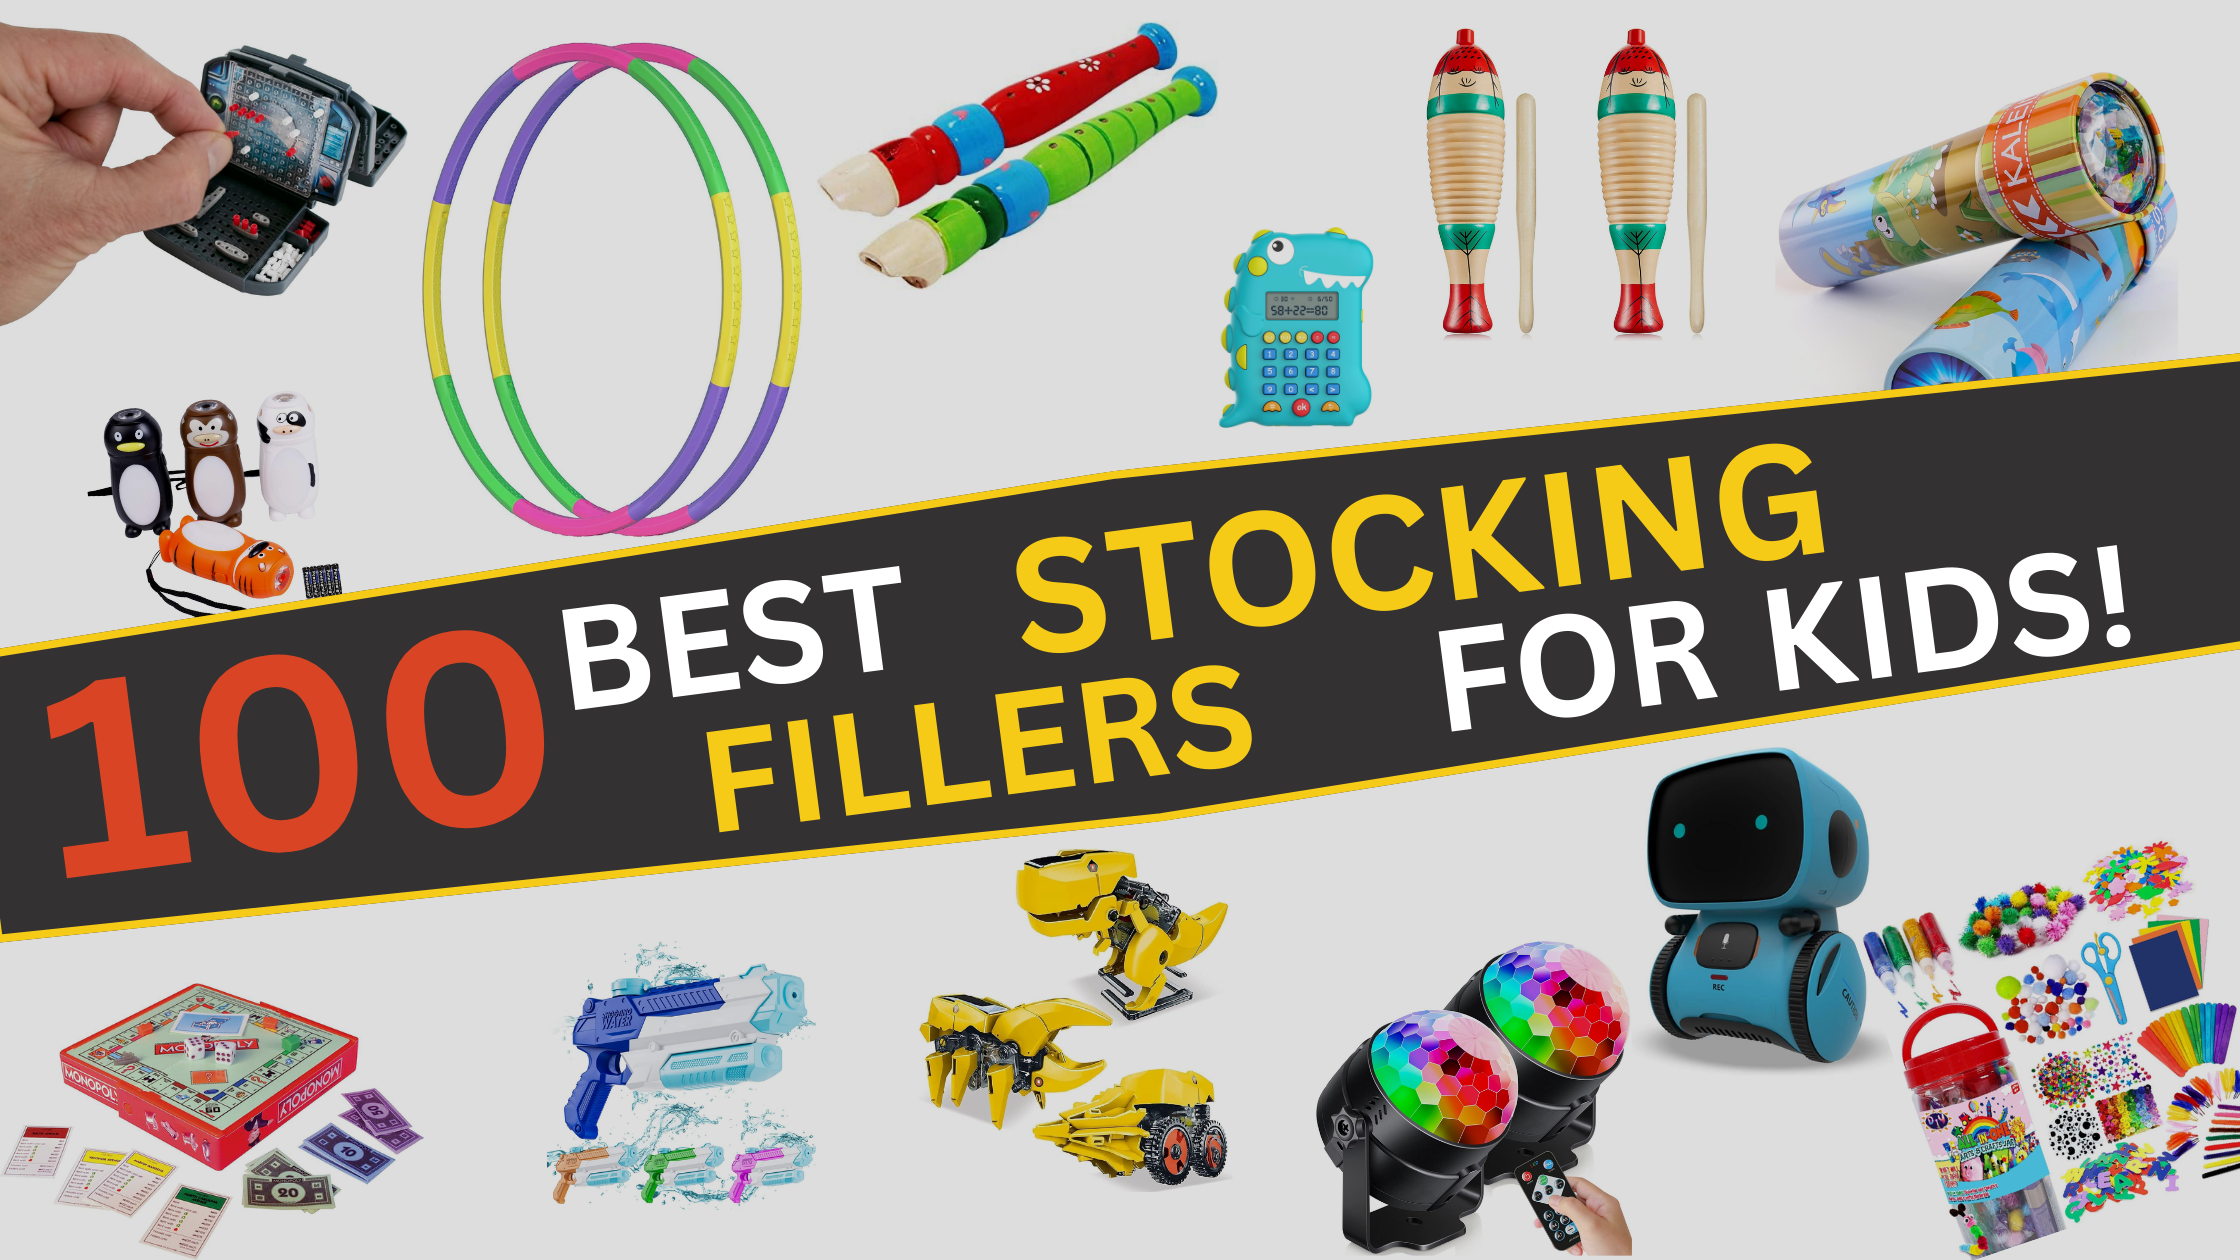 Fun and Festive: 100 Best Stocking Fillers for Kids